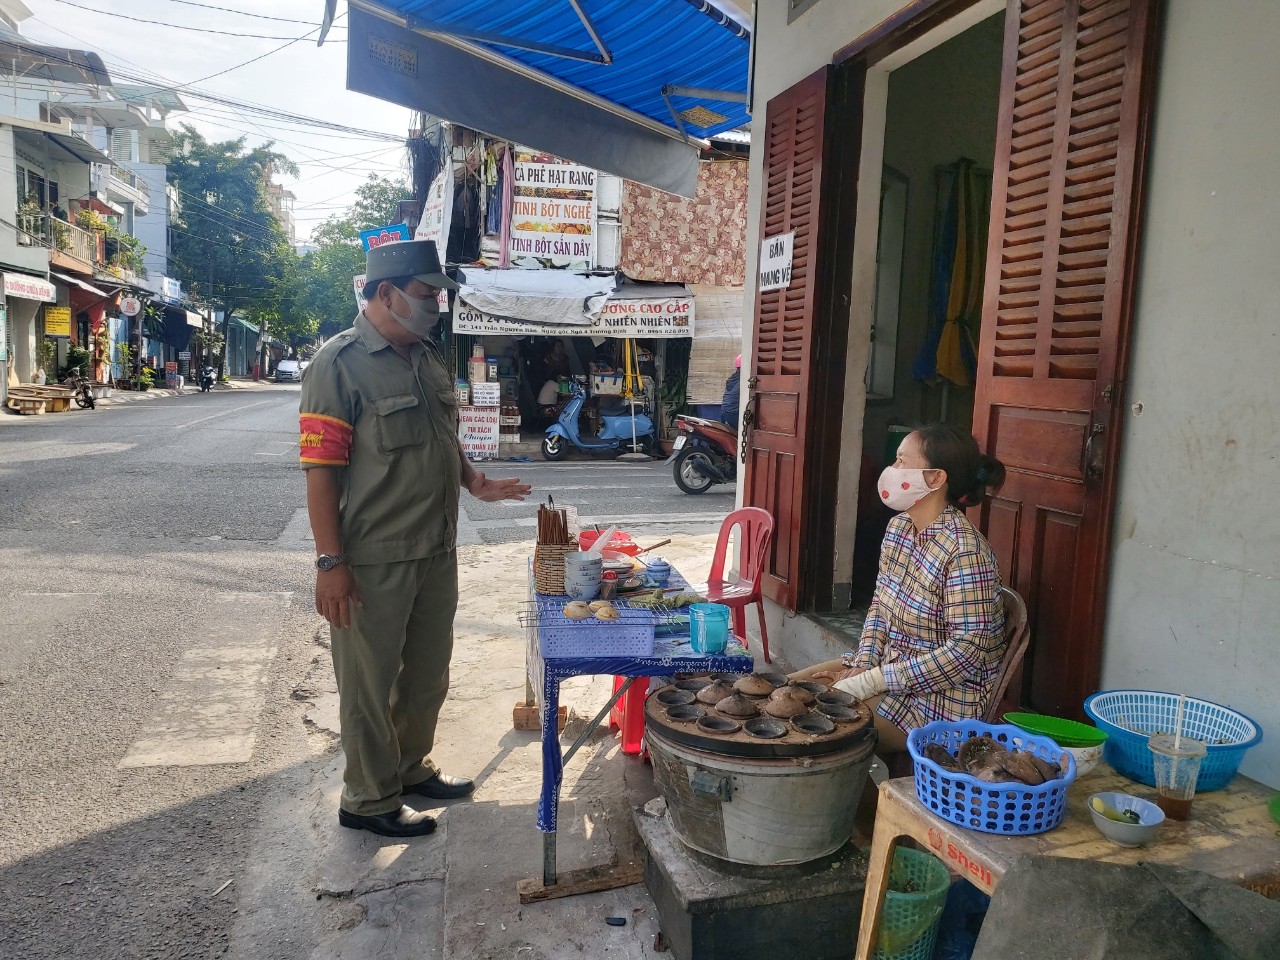 A functional staff member warning a food vendor about social distancing regulations